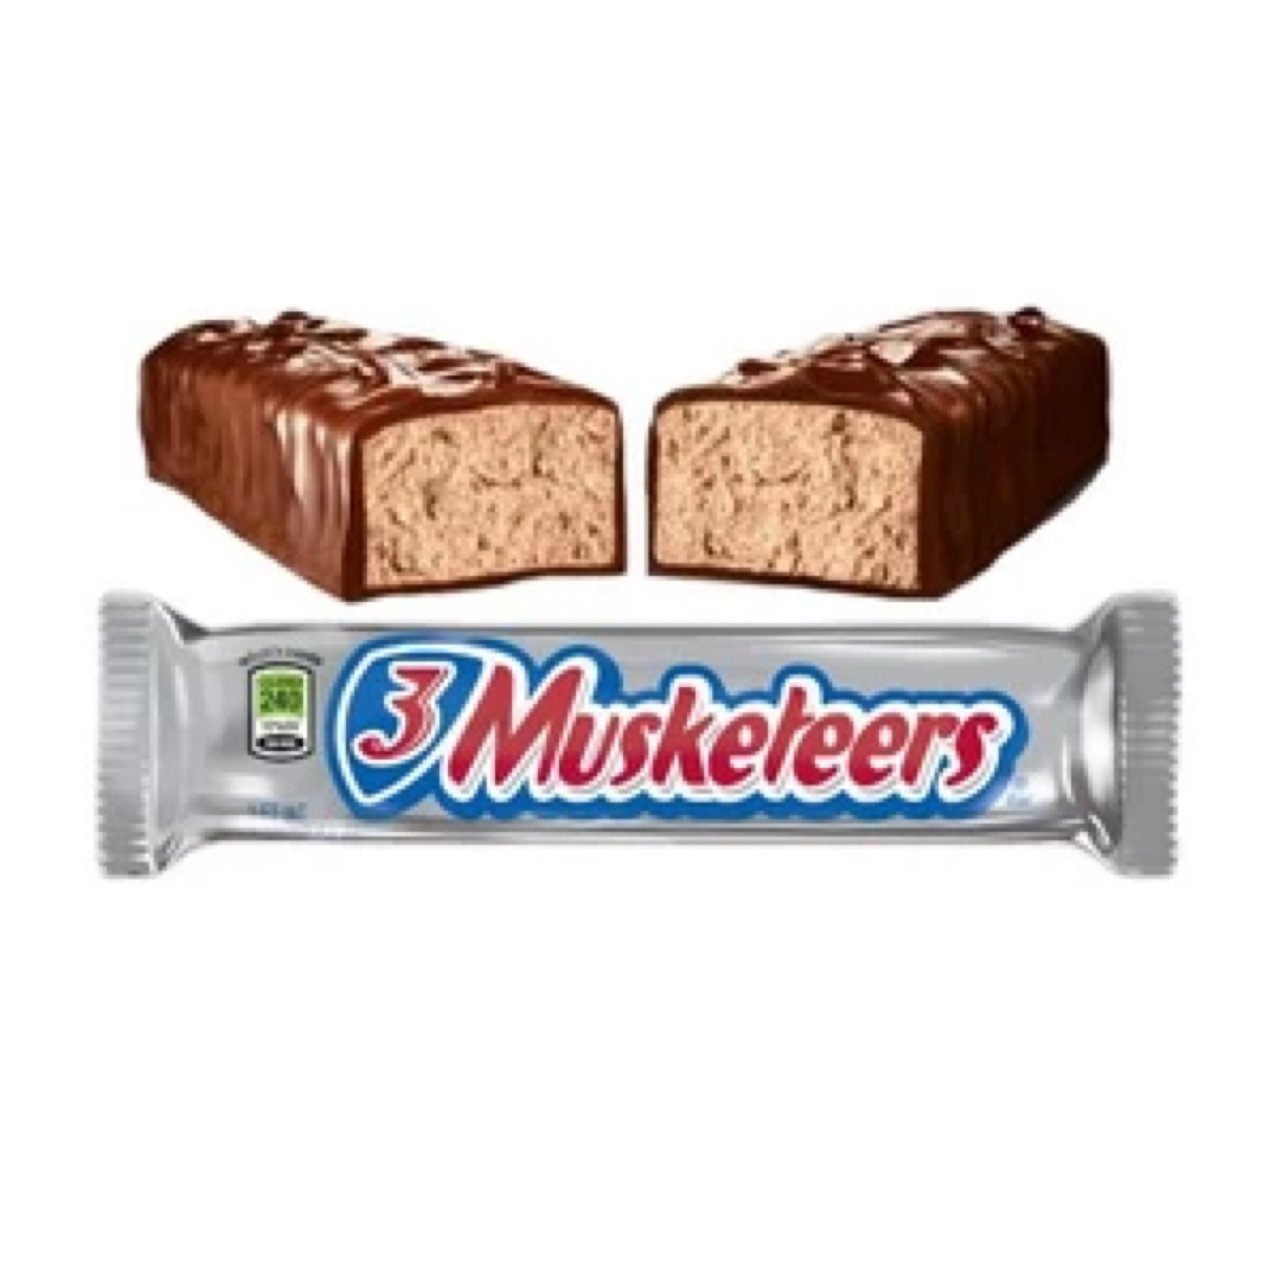 Amazon.com : 3 Musketeers Candy Bar (2.1